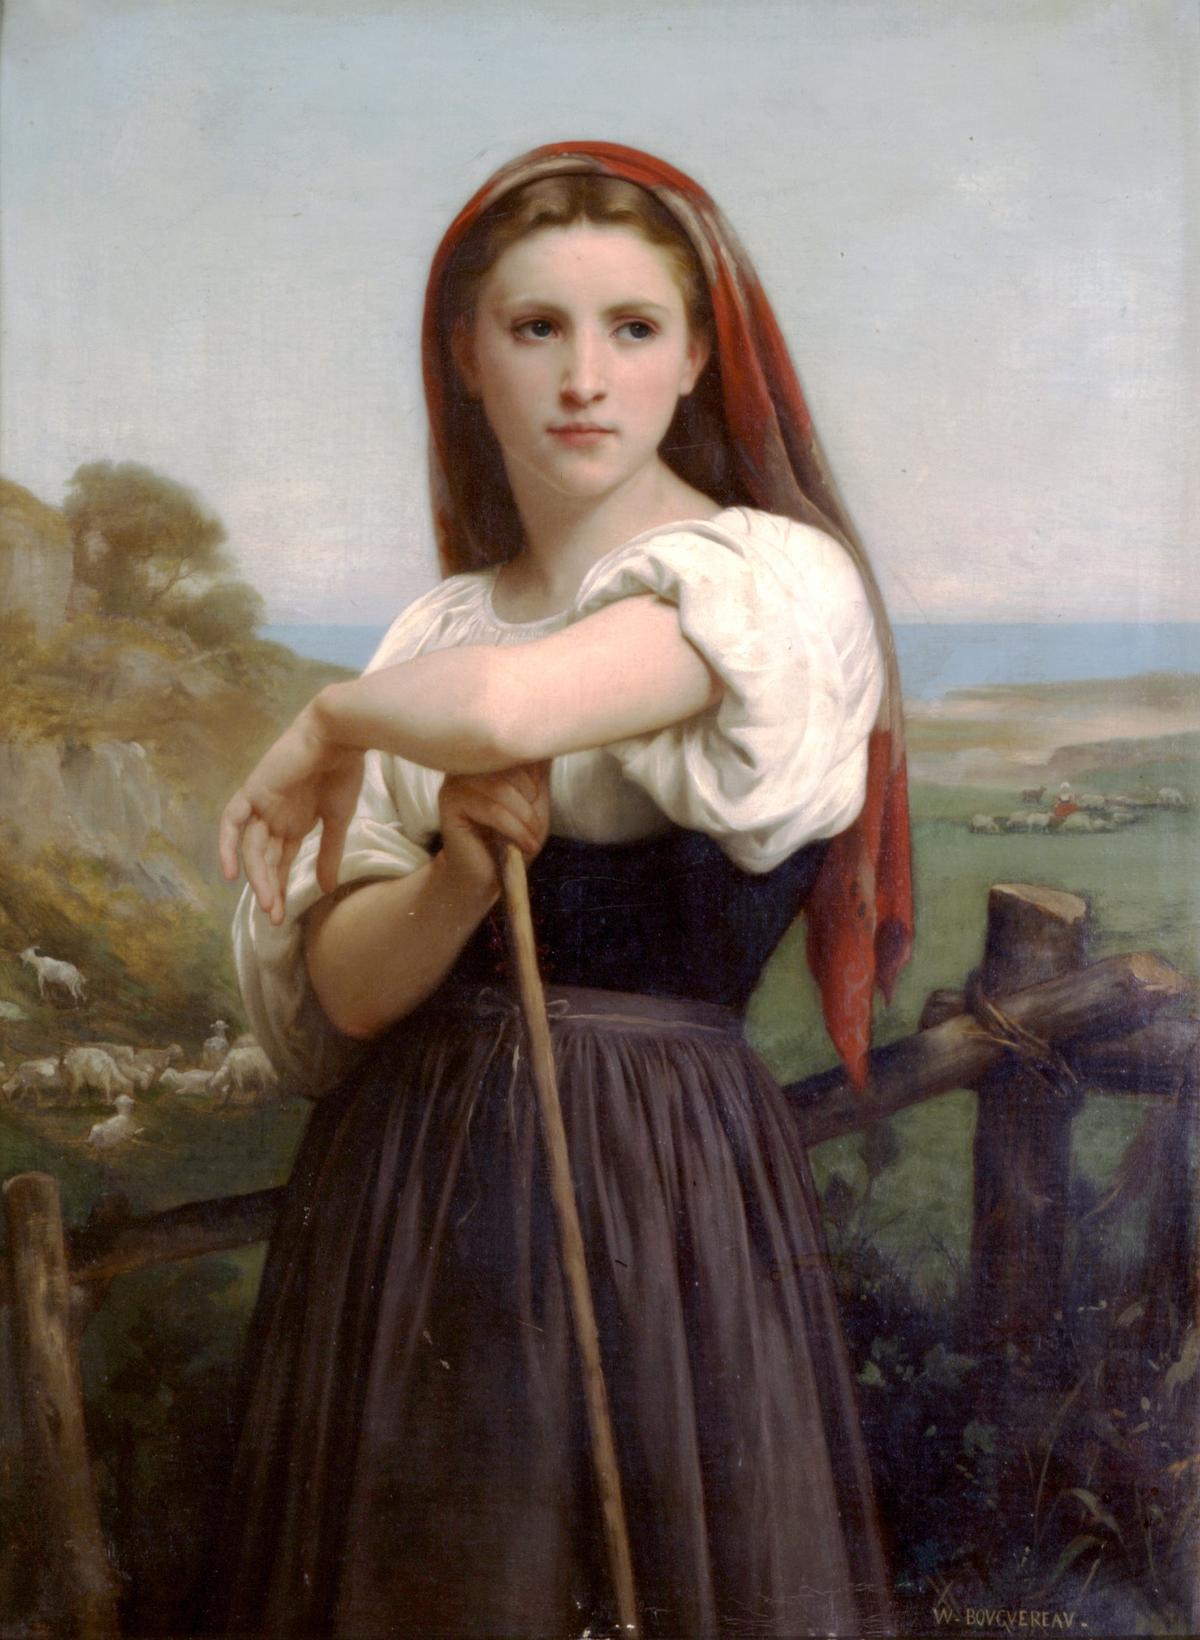 William Bouguereau, <em>Young Shepherdess.</em> 1868. (©<a href="https://commons.wikimedia.org/wiki/File:William-Adolphe_Bouguereau_(1825-1905)_-_Young_Shepherdess_(1868).jpg">Wikimedia Commons</a>)